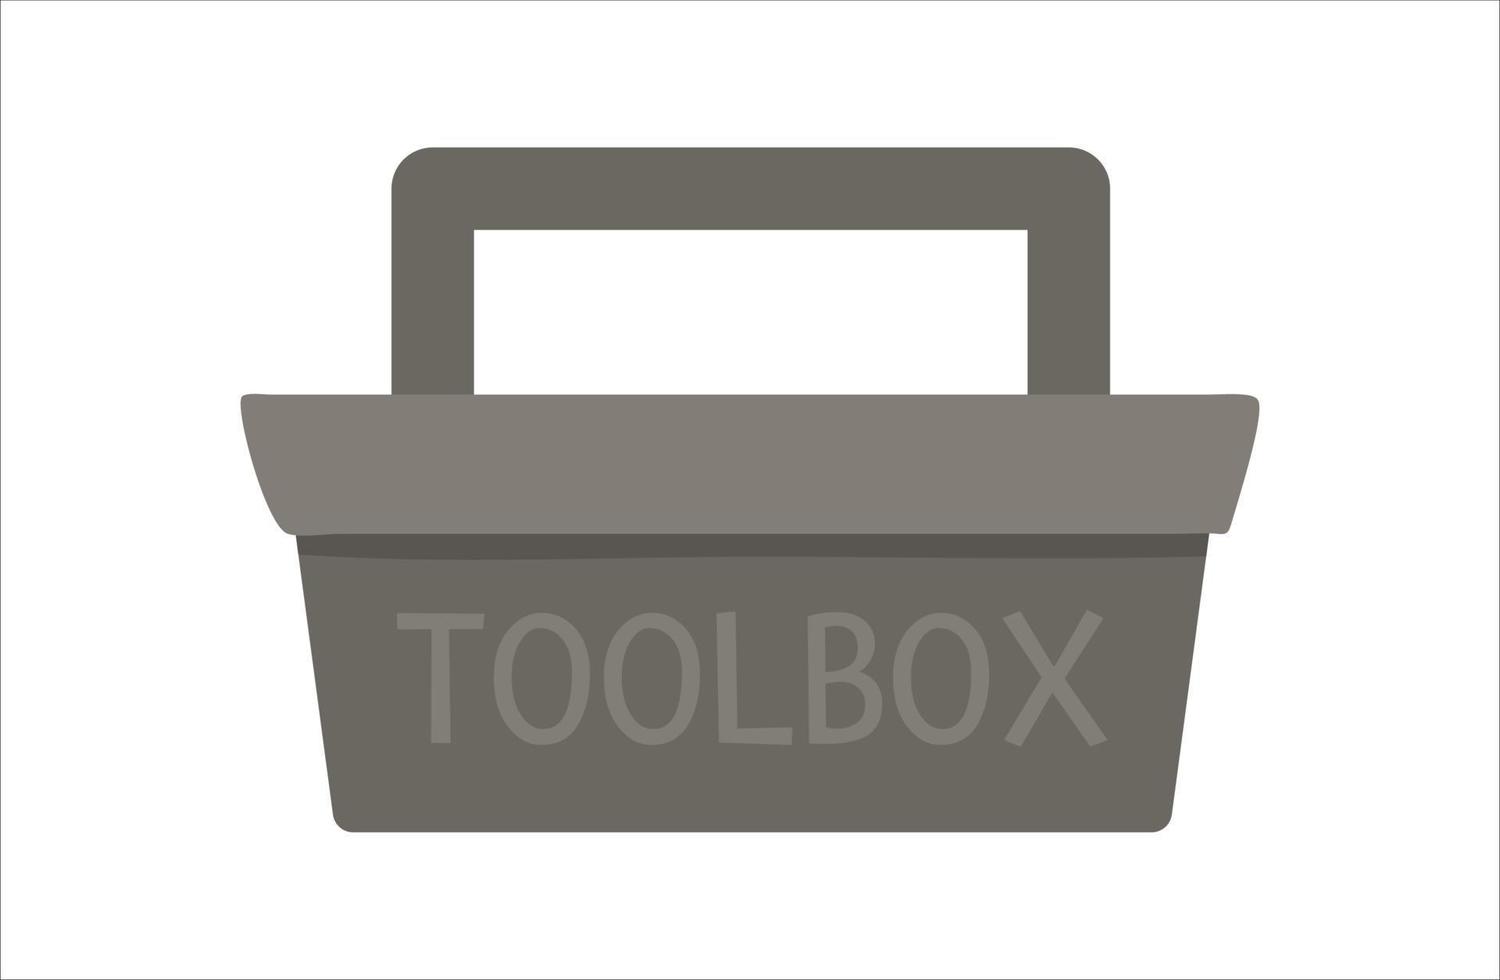 Vector tool box icon. Flat colored illustration of container. Building, carpenter equipment for card, poster or flyer design. Woodwork, repair service or craft workshop concept